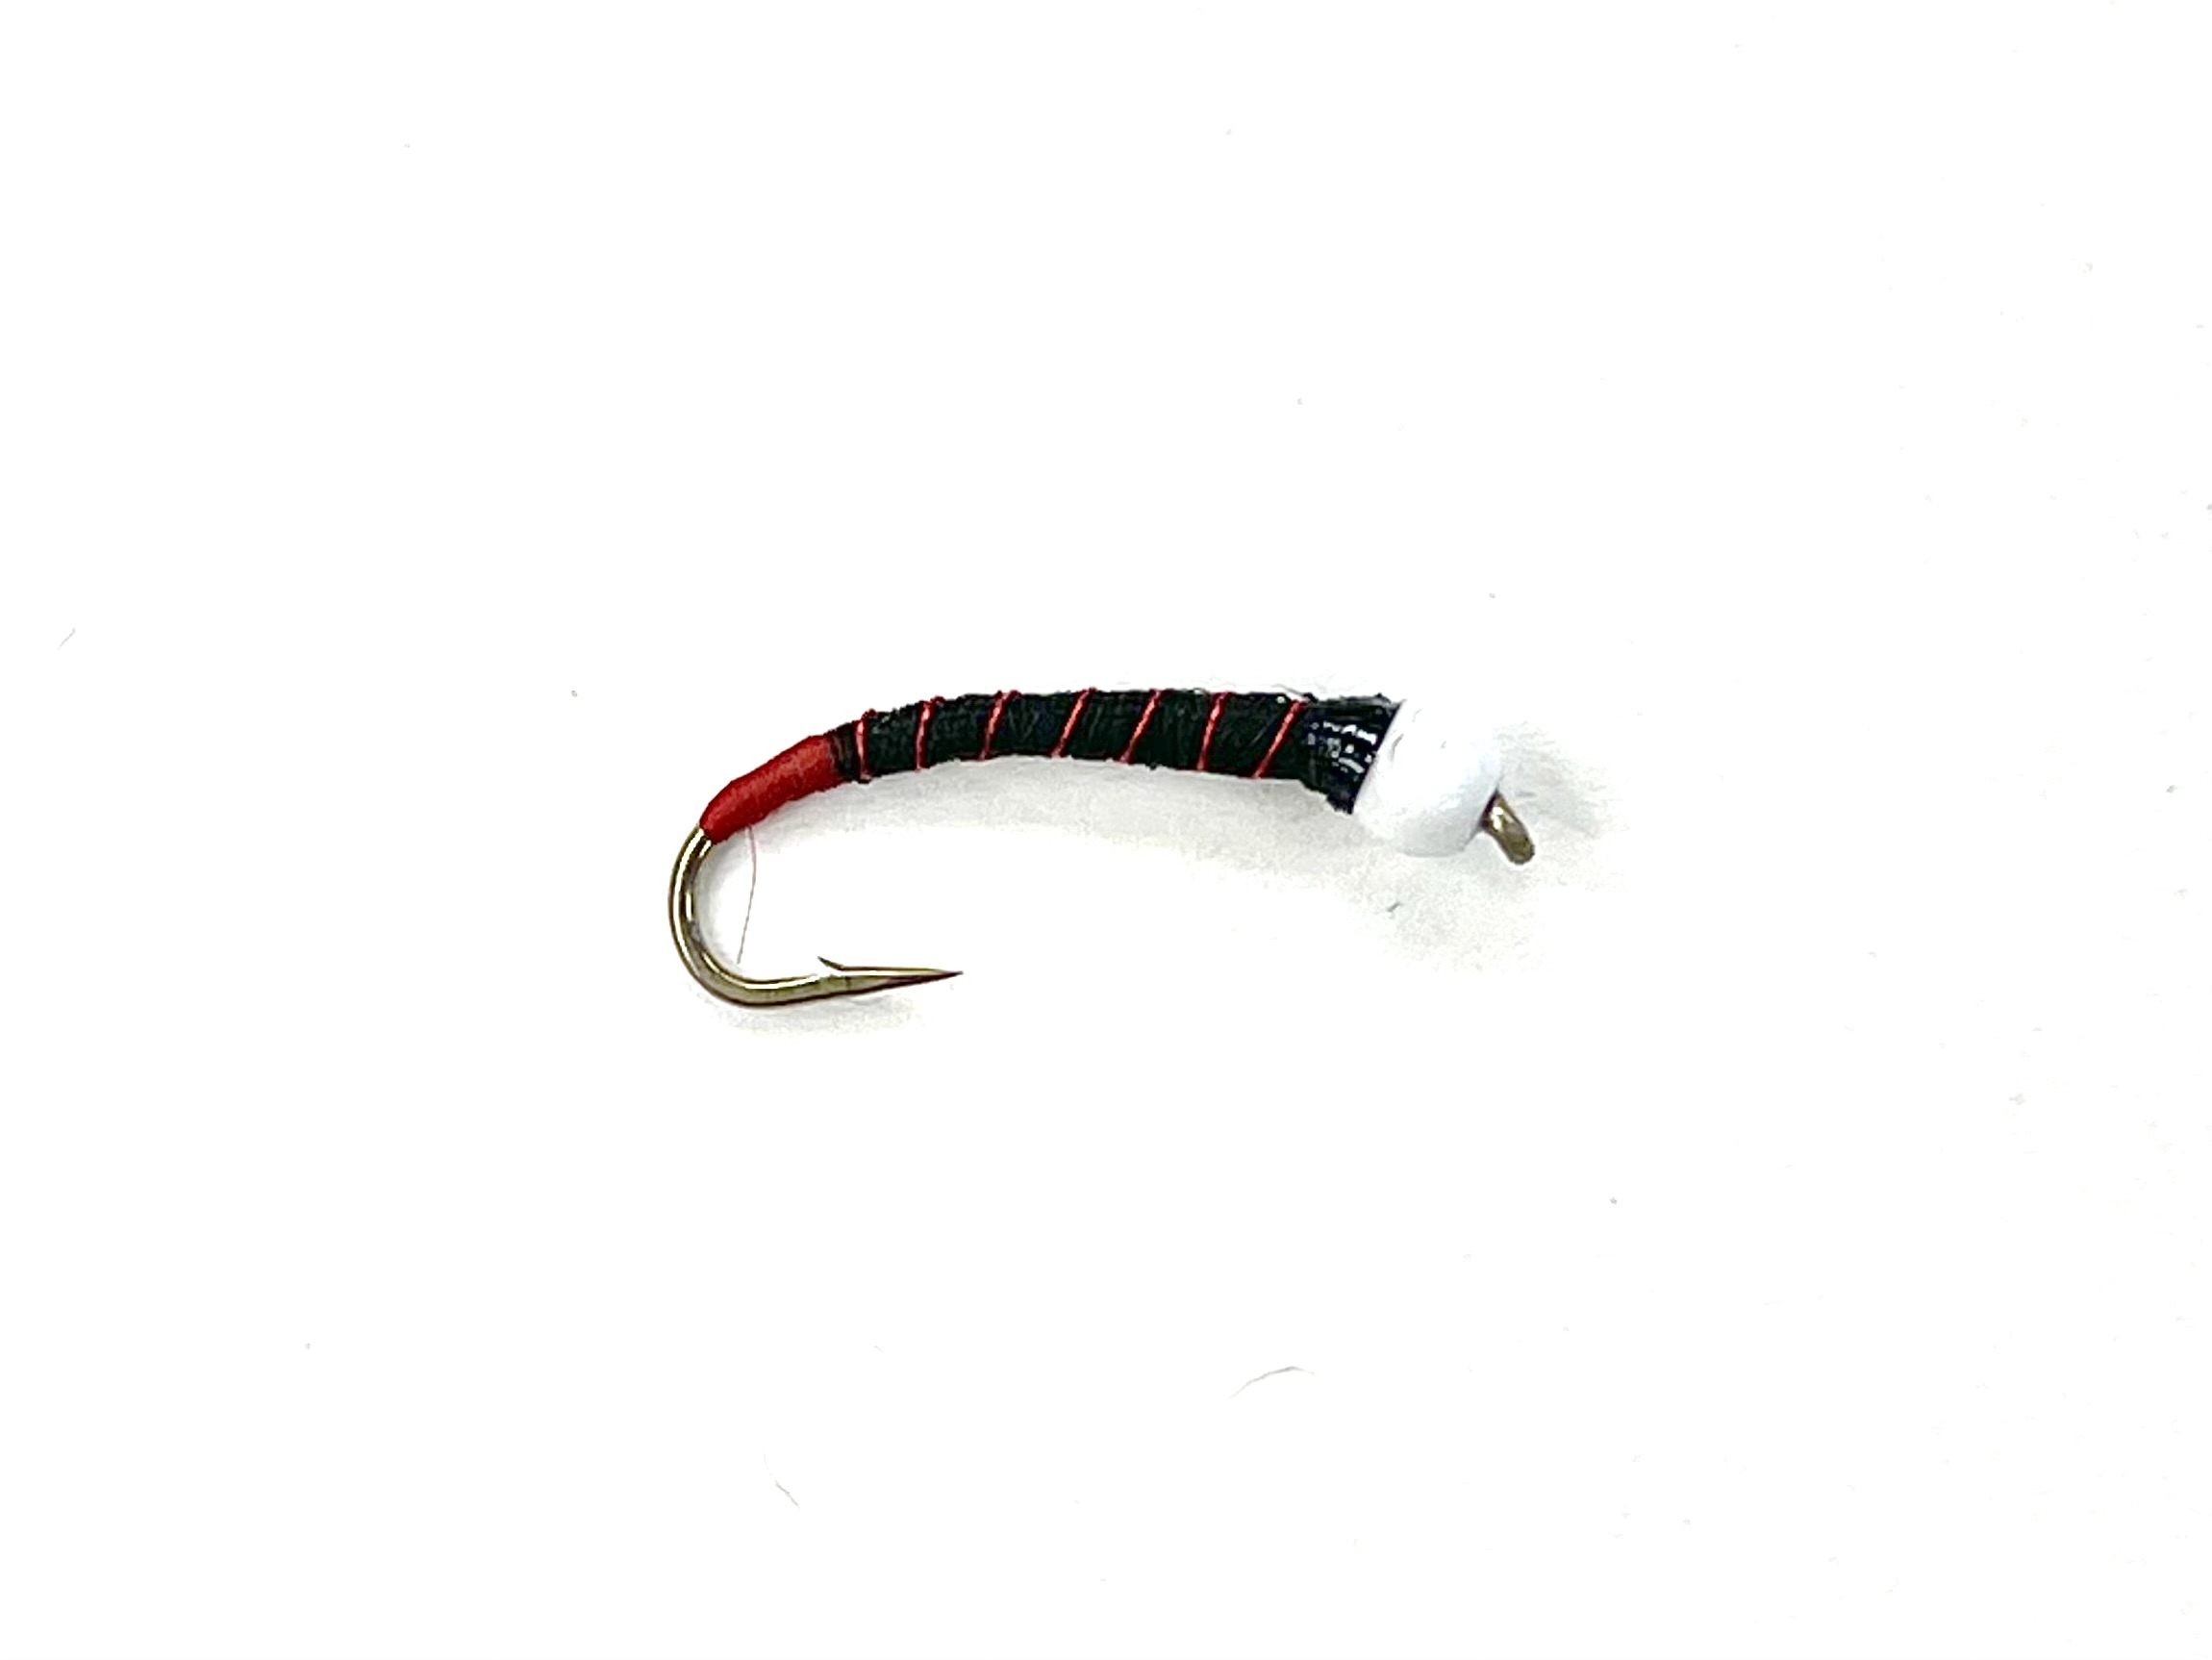 FAD Candy Cone Red Butt Chironomid - Black/Red Wire - Size 14